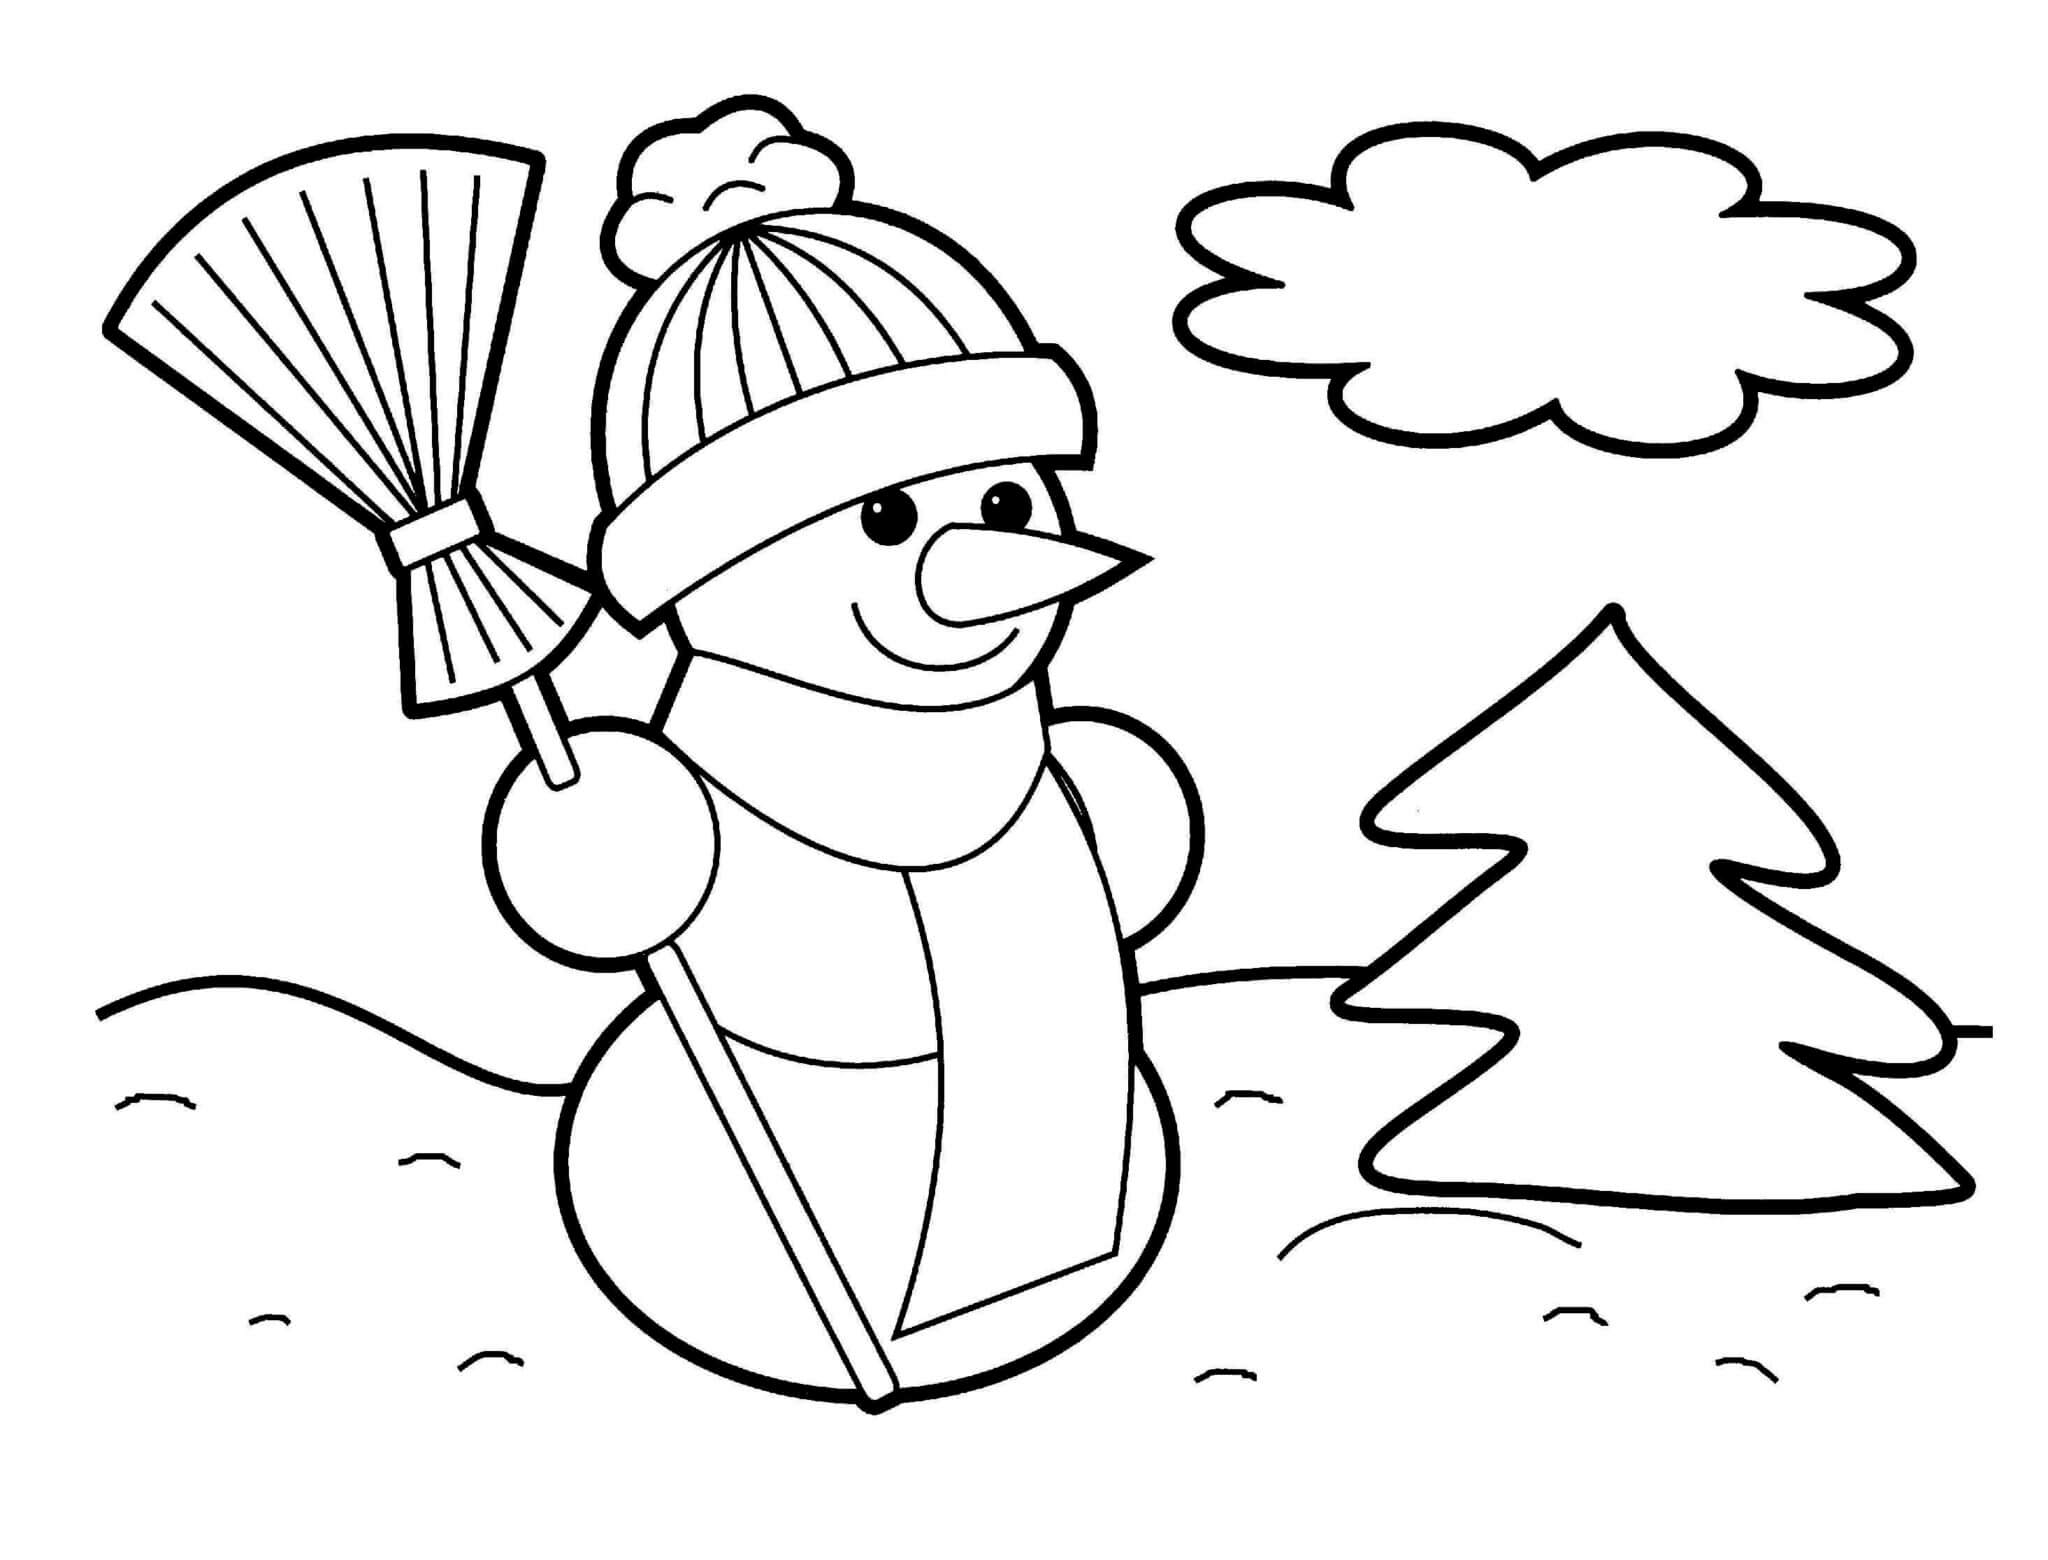 Easy Snowman Christmas Coloring Page For Preschoolers 2048x1560